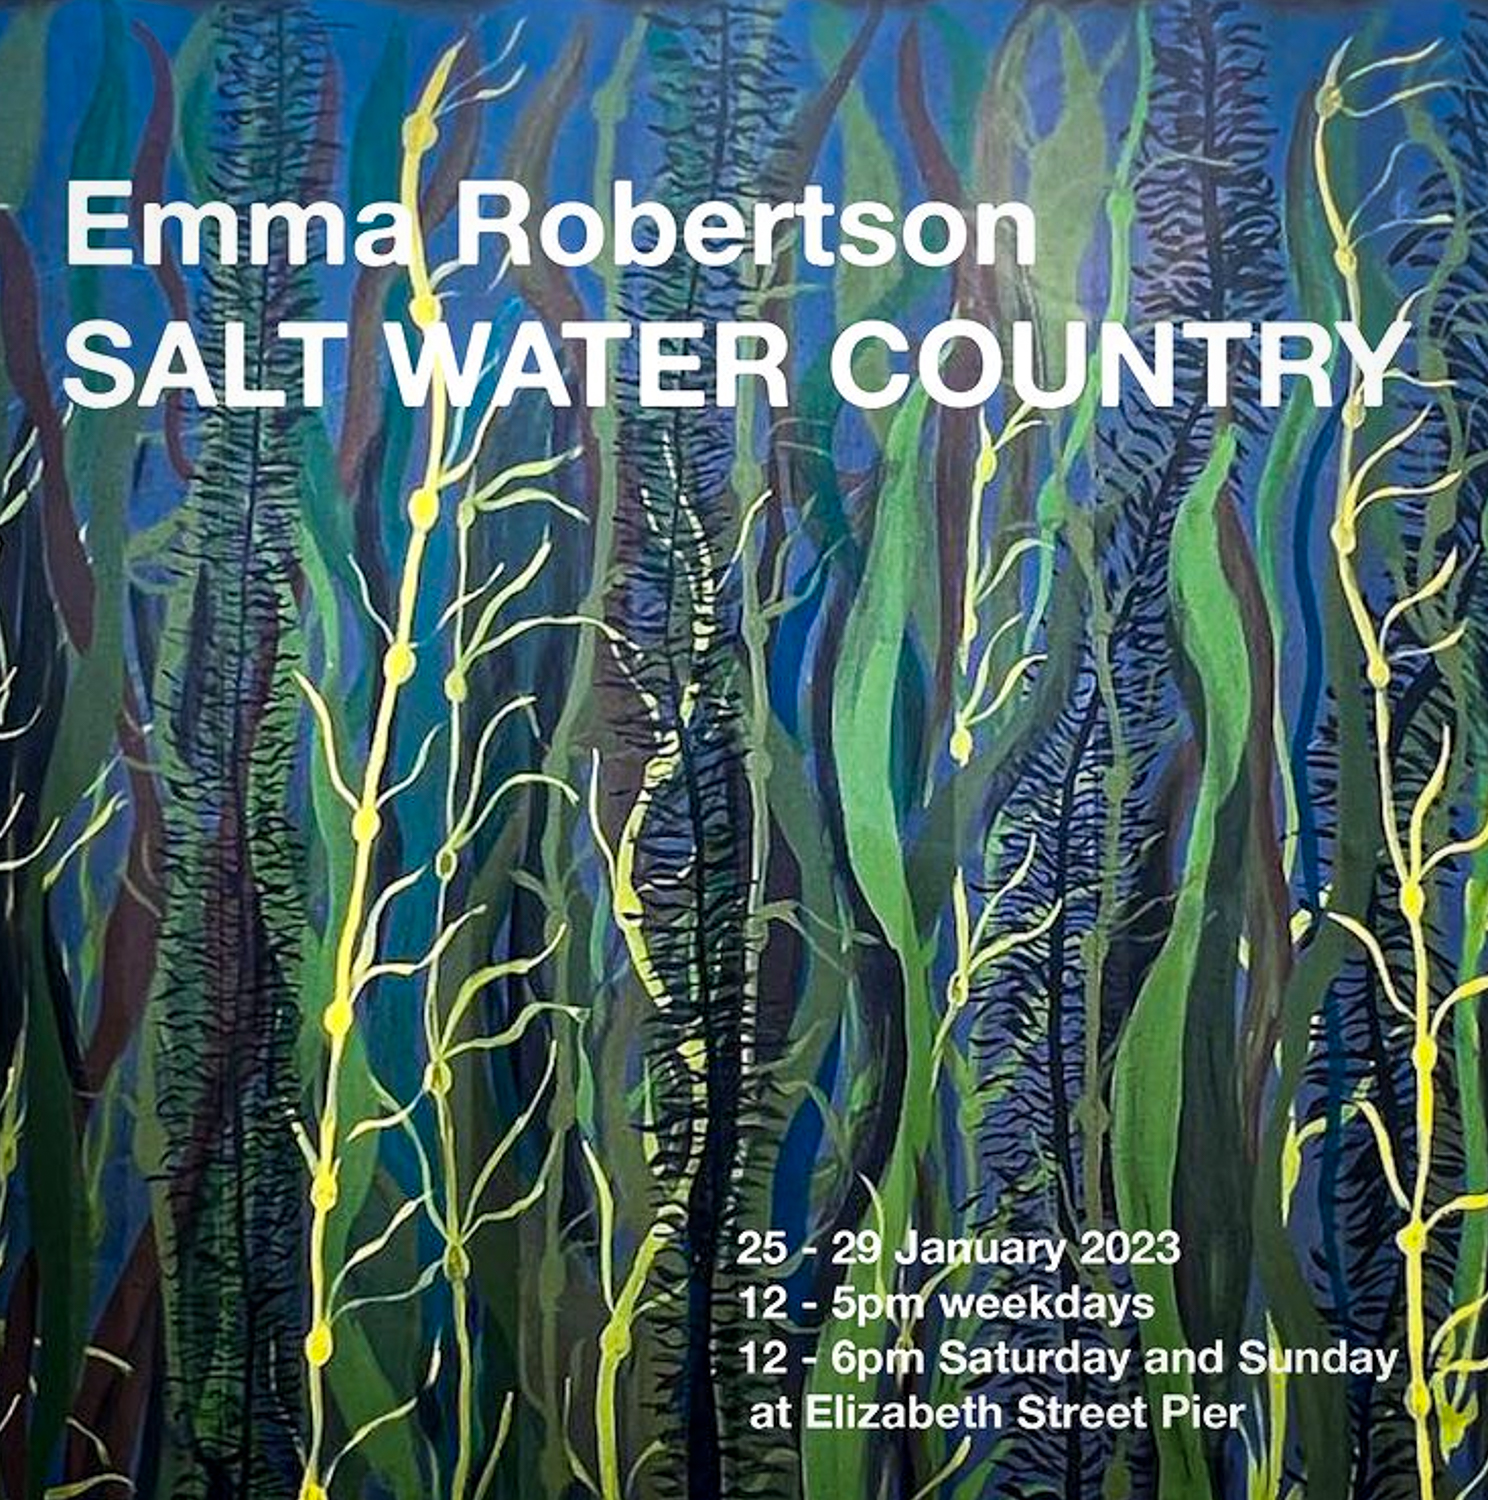 A blue and green sea kelp forest with the words "Emma Robertson Salt Water County" in white text